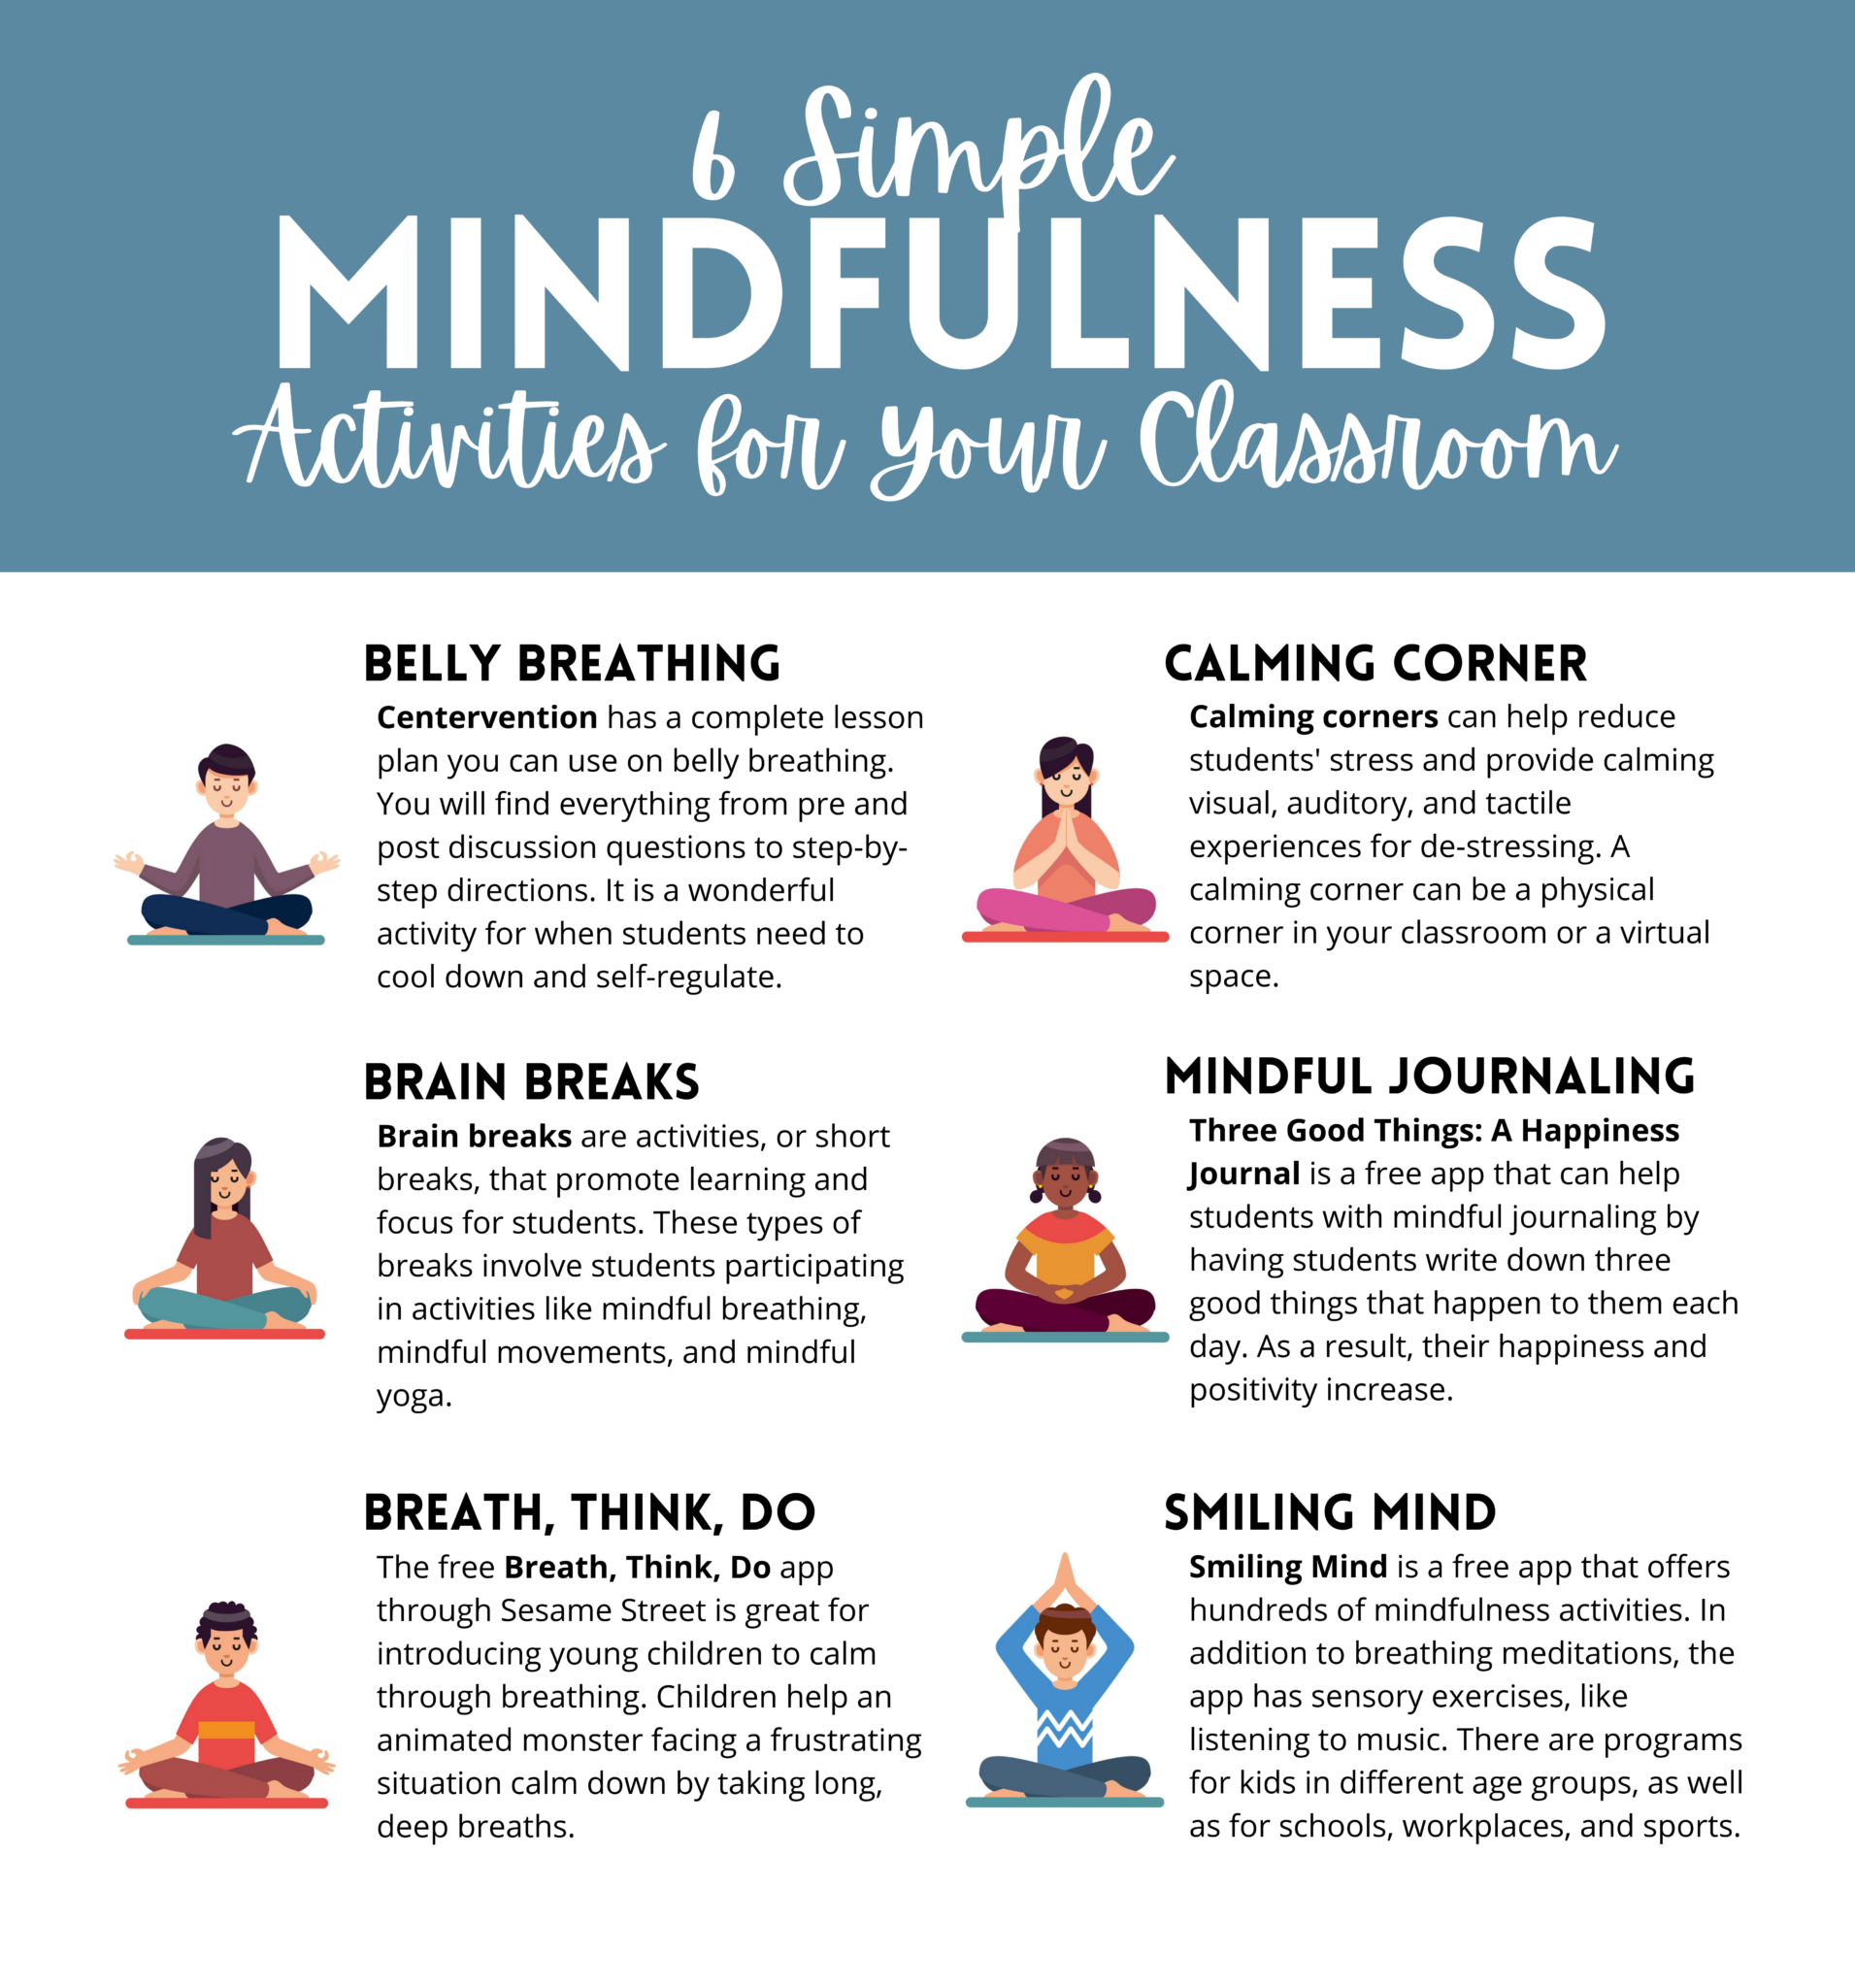 six-simple-mindfulness-activities-for-your-classroom-technotes-blog